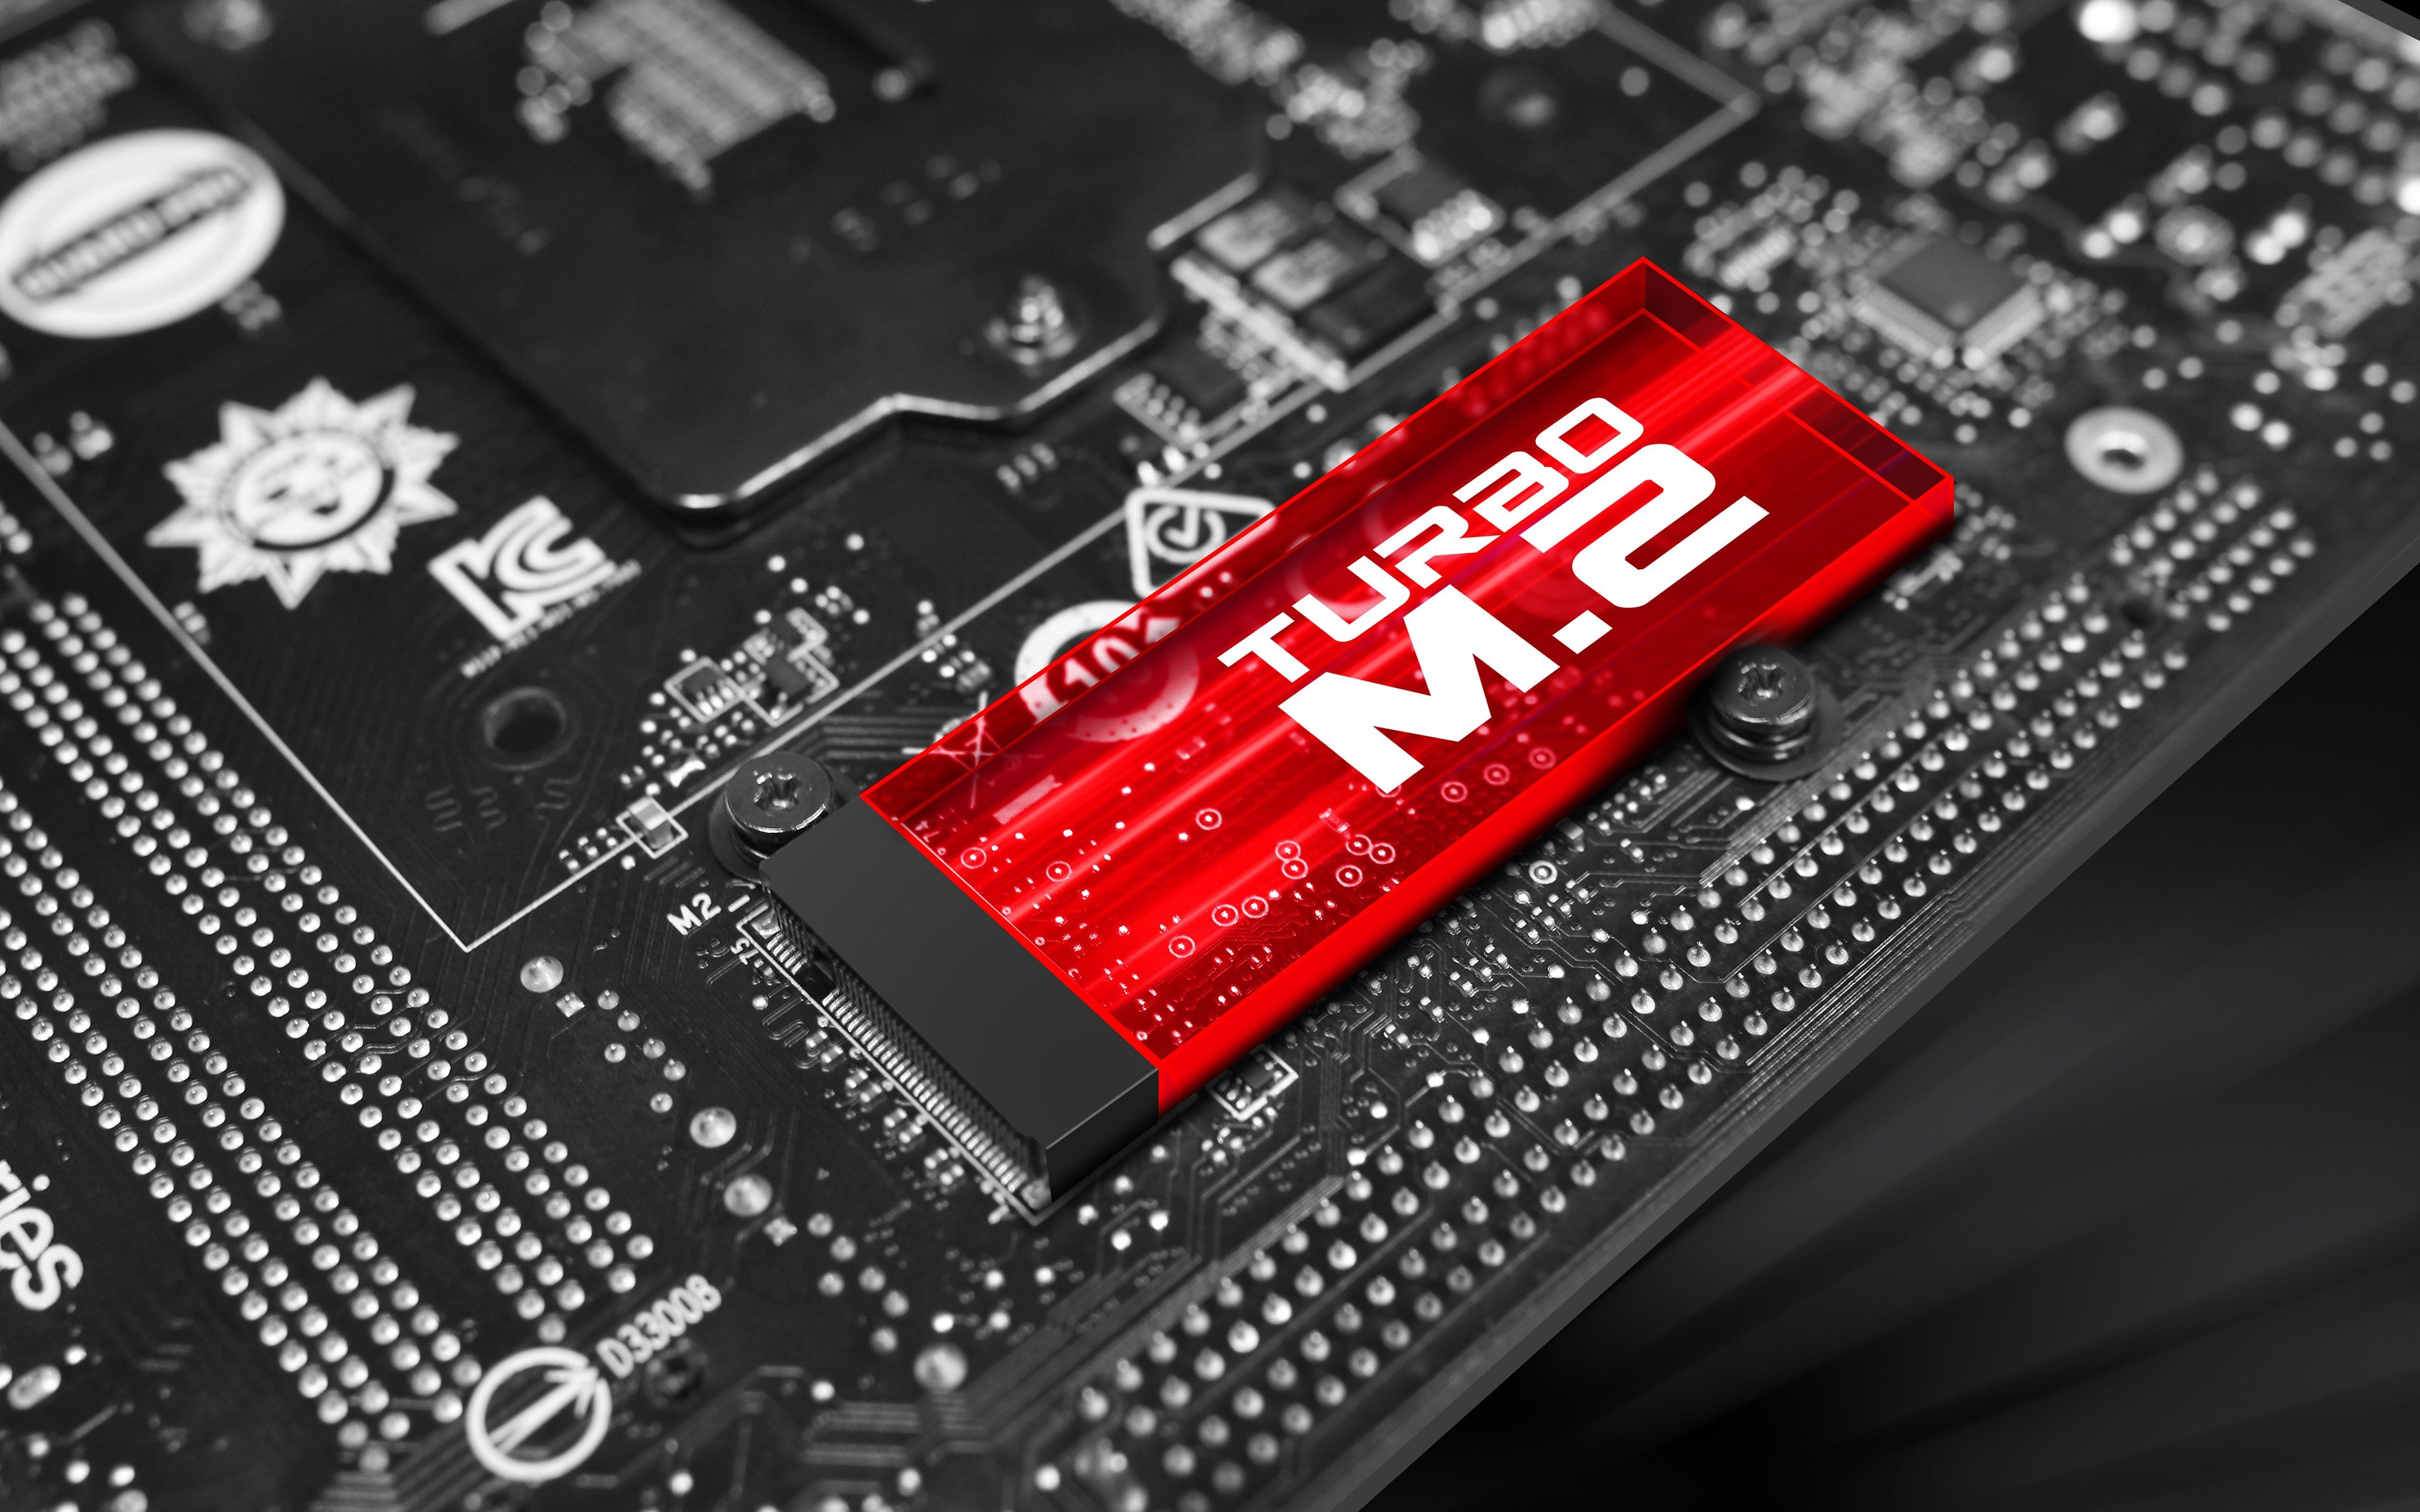 MSI, Motherboards, Hardware, Technology, PC gaming Wallpaper